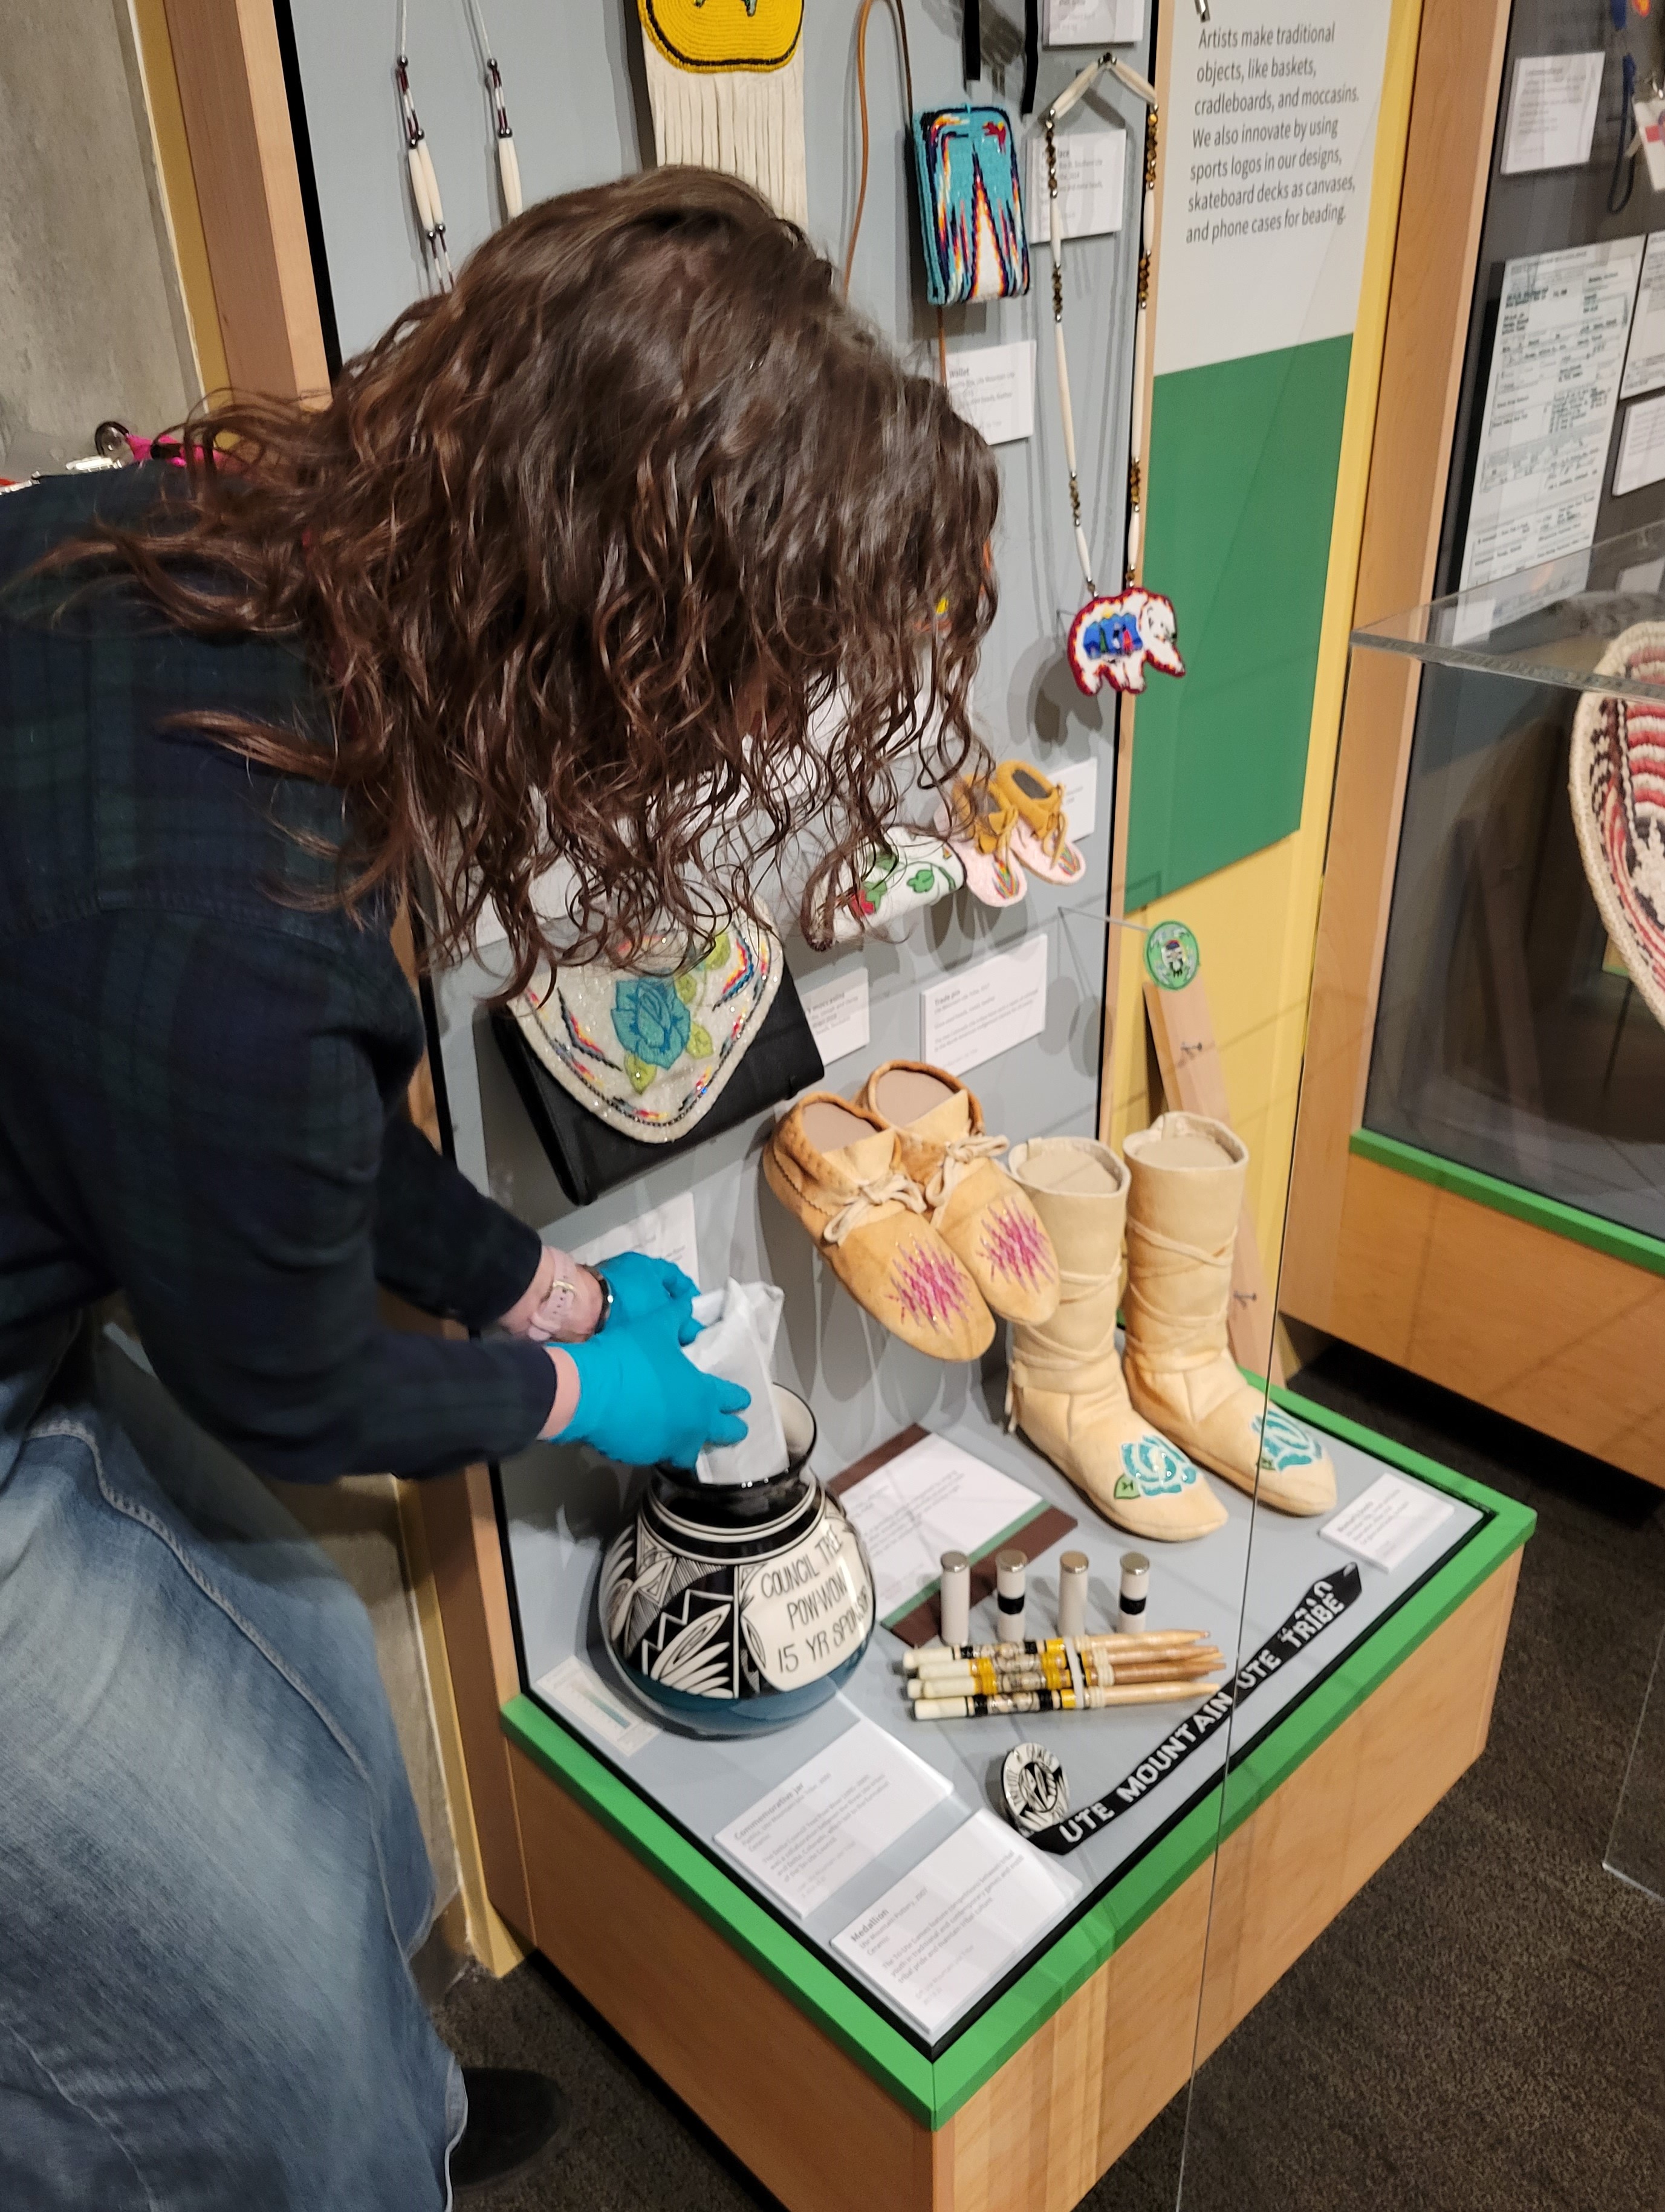 Photo of a person leaning down to change a sachet of activated carbon that has been discreetly placed inside of a pot that is part of an exhibit of Native American artwork from the Ute Mountain Ute Tribe. The museum employee changing the carbon is wearing blue nitril gloves and carefully places the sachet inside of the glazed pot.